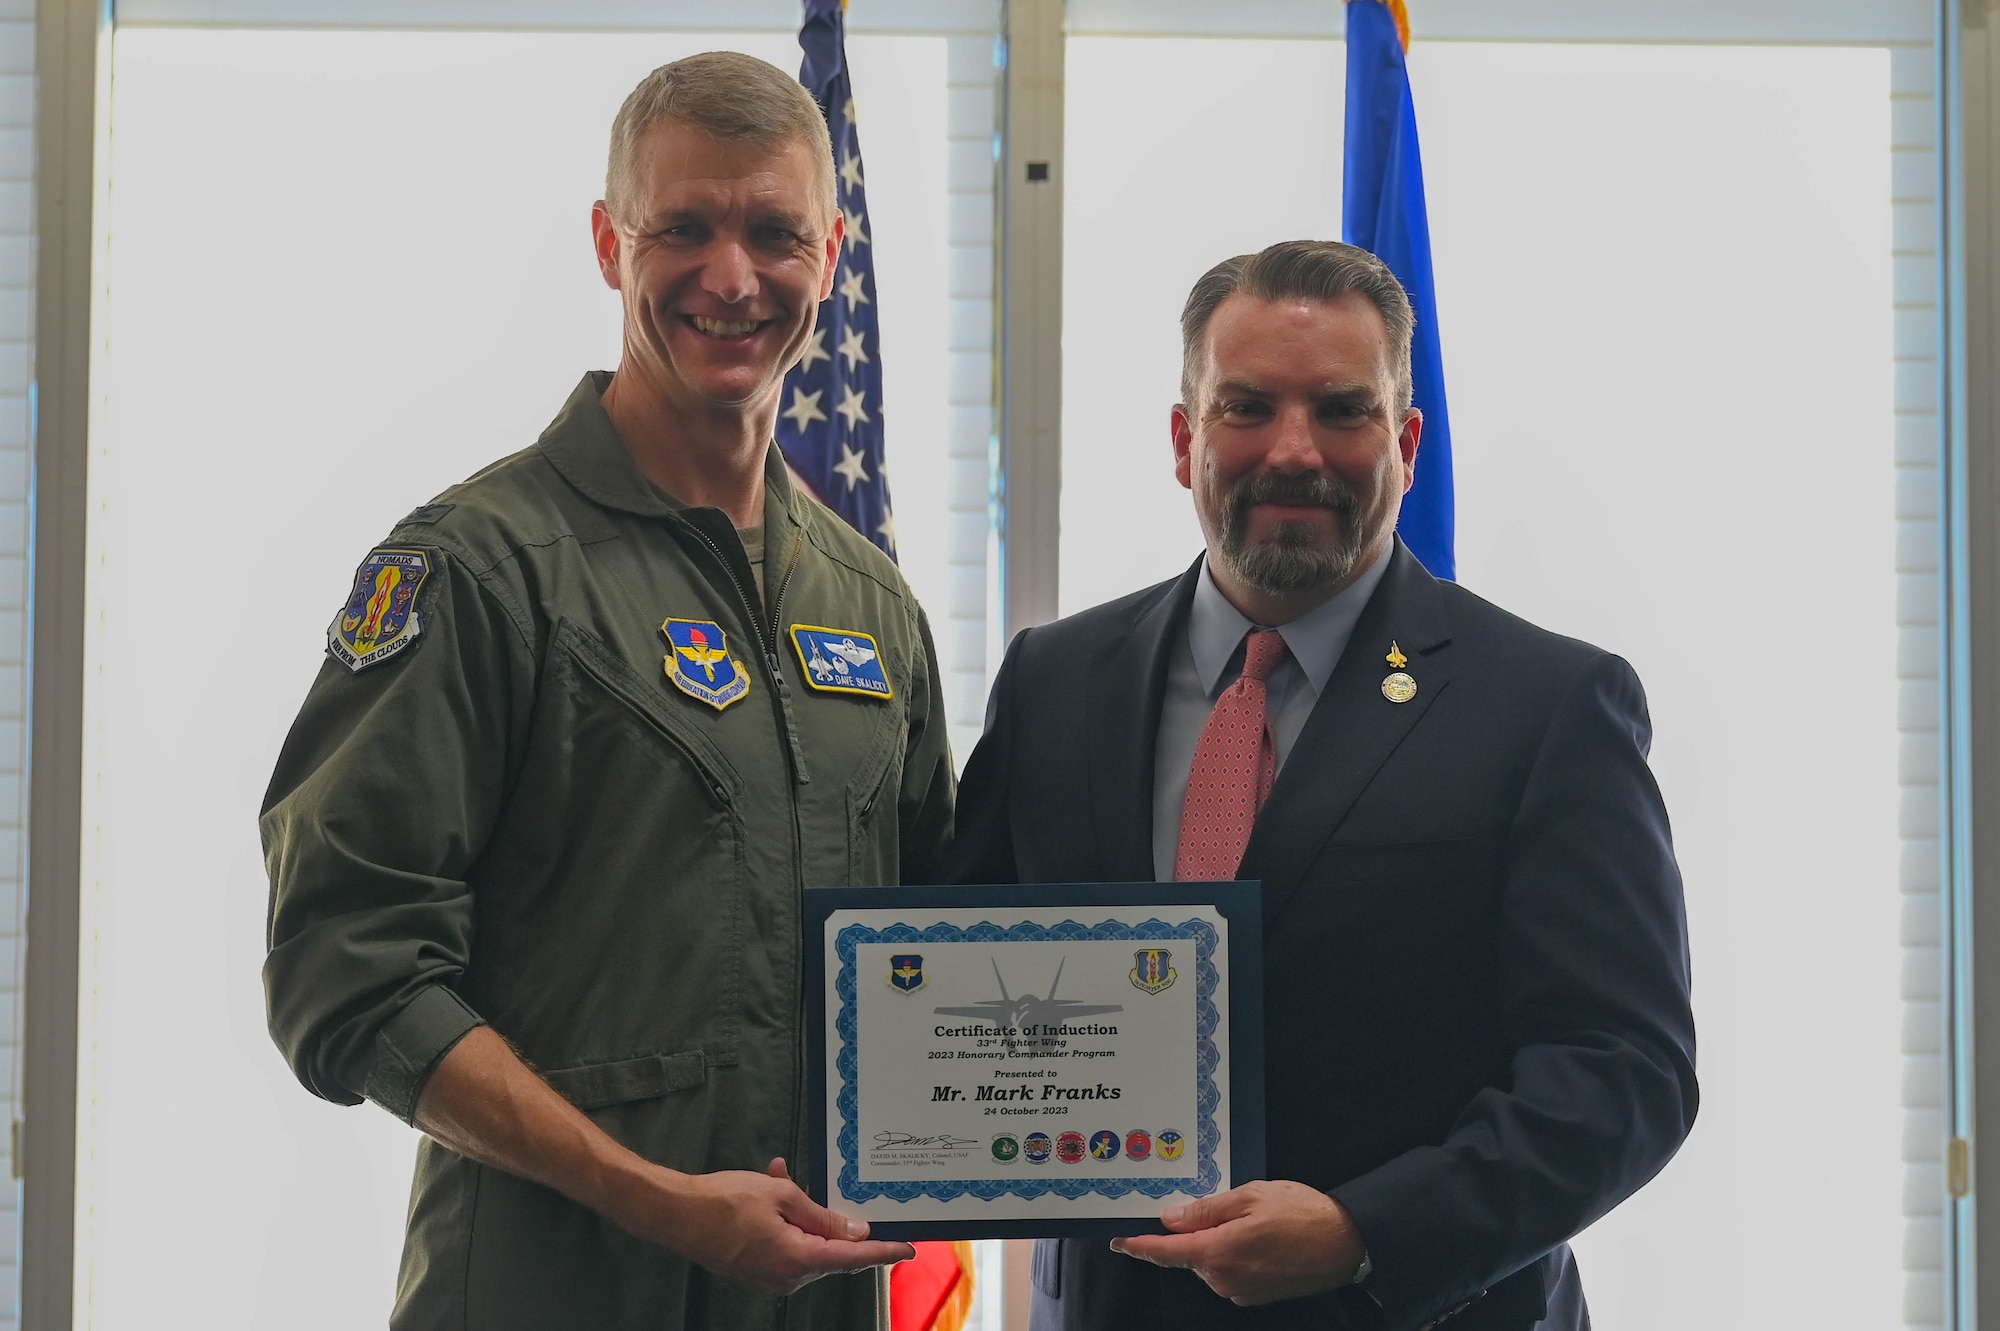 Honorary Commanders serve as the liaison between the 33rd FW and the surrounding community by maintaining strong relations through mutually beneficial professional partnerships.